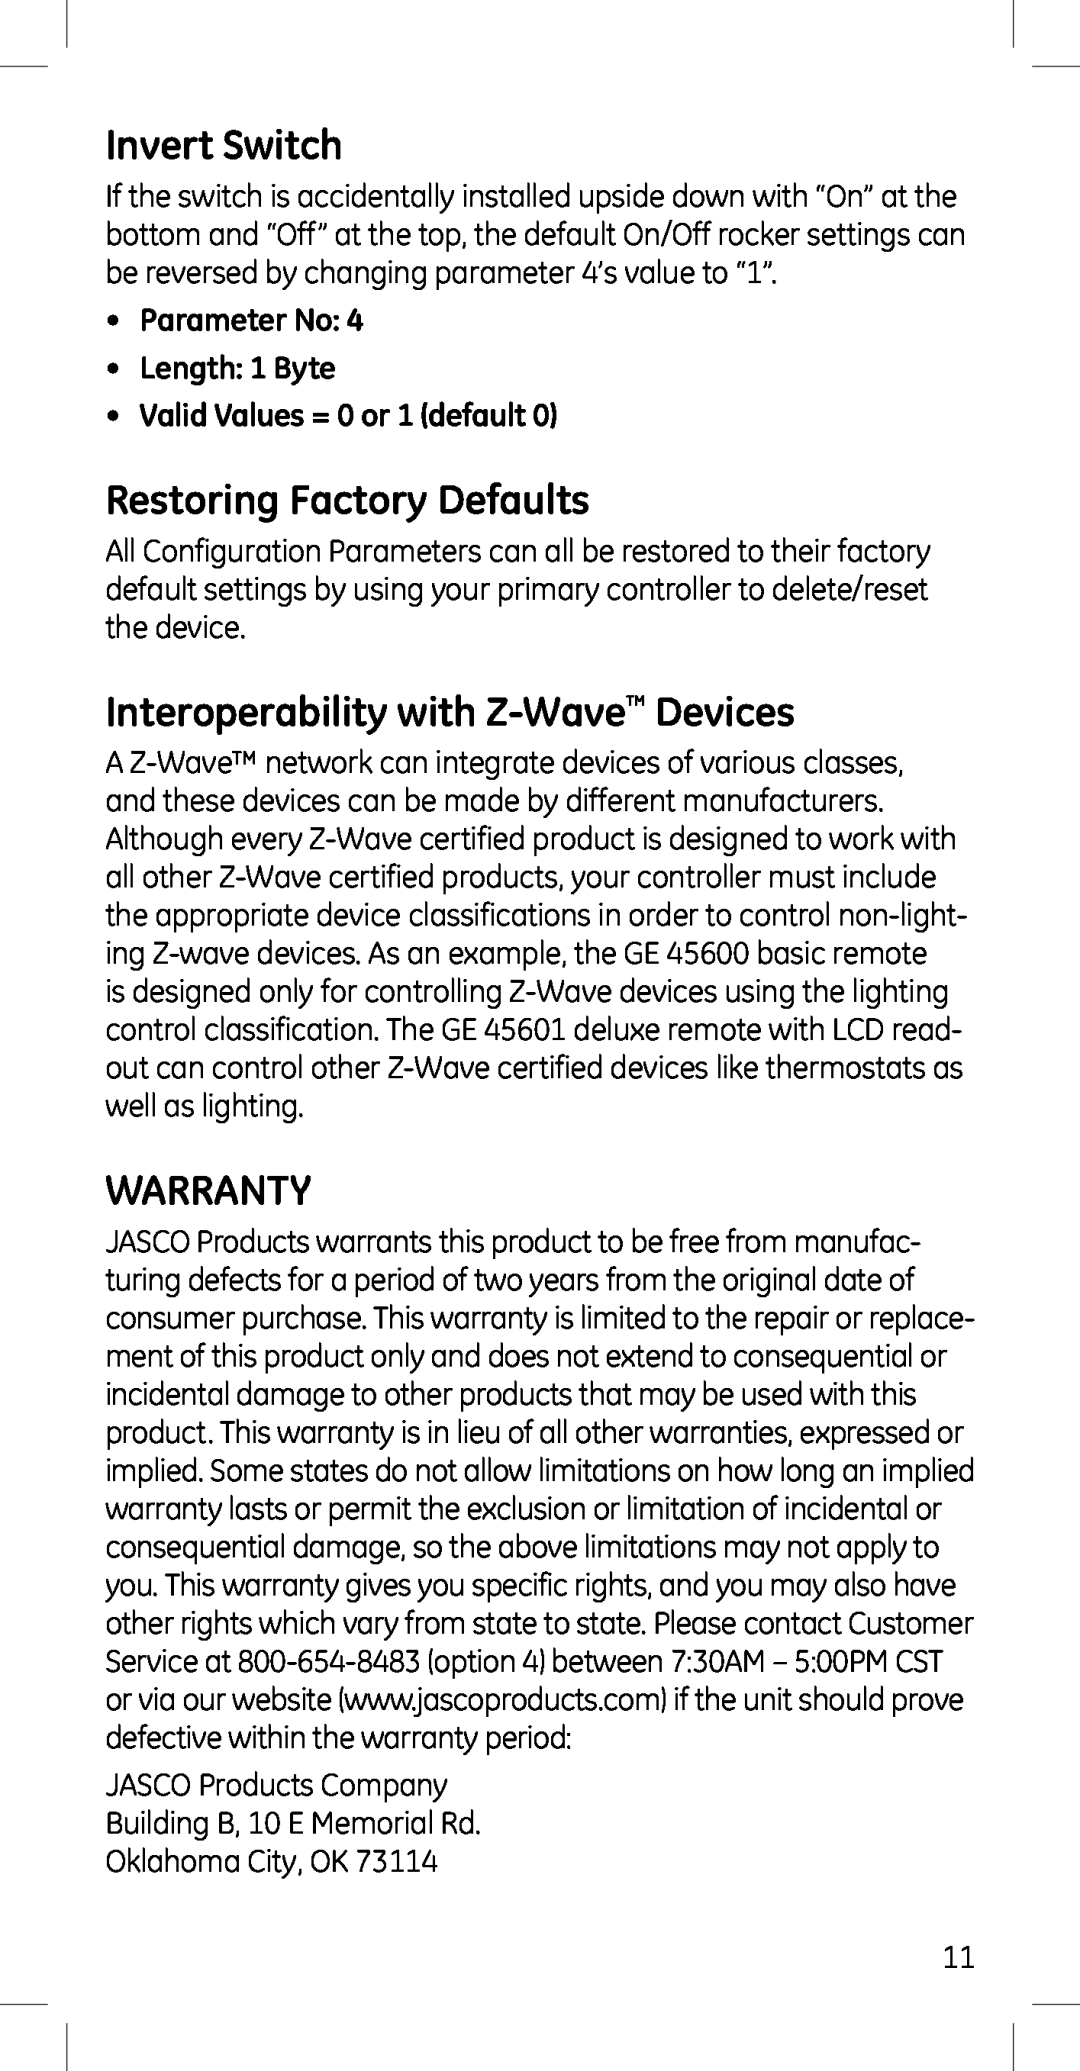 Jasco 45609 manual Invert Switch, Restoring Factory Defaults, Interoperability with Z-Wave Devices, Warranty 